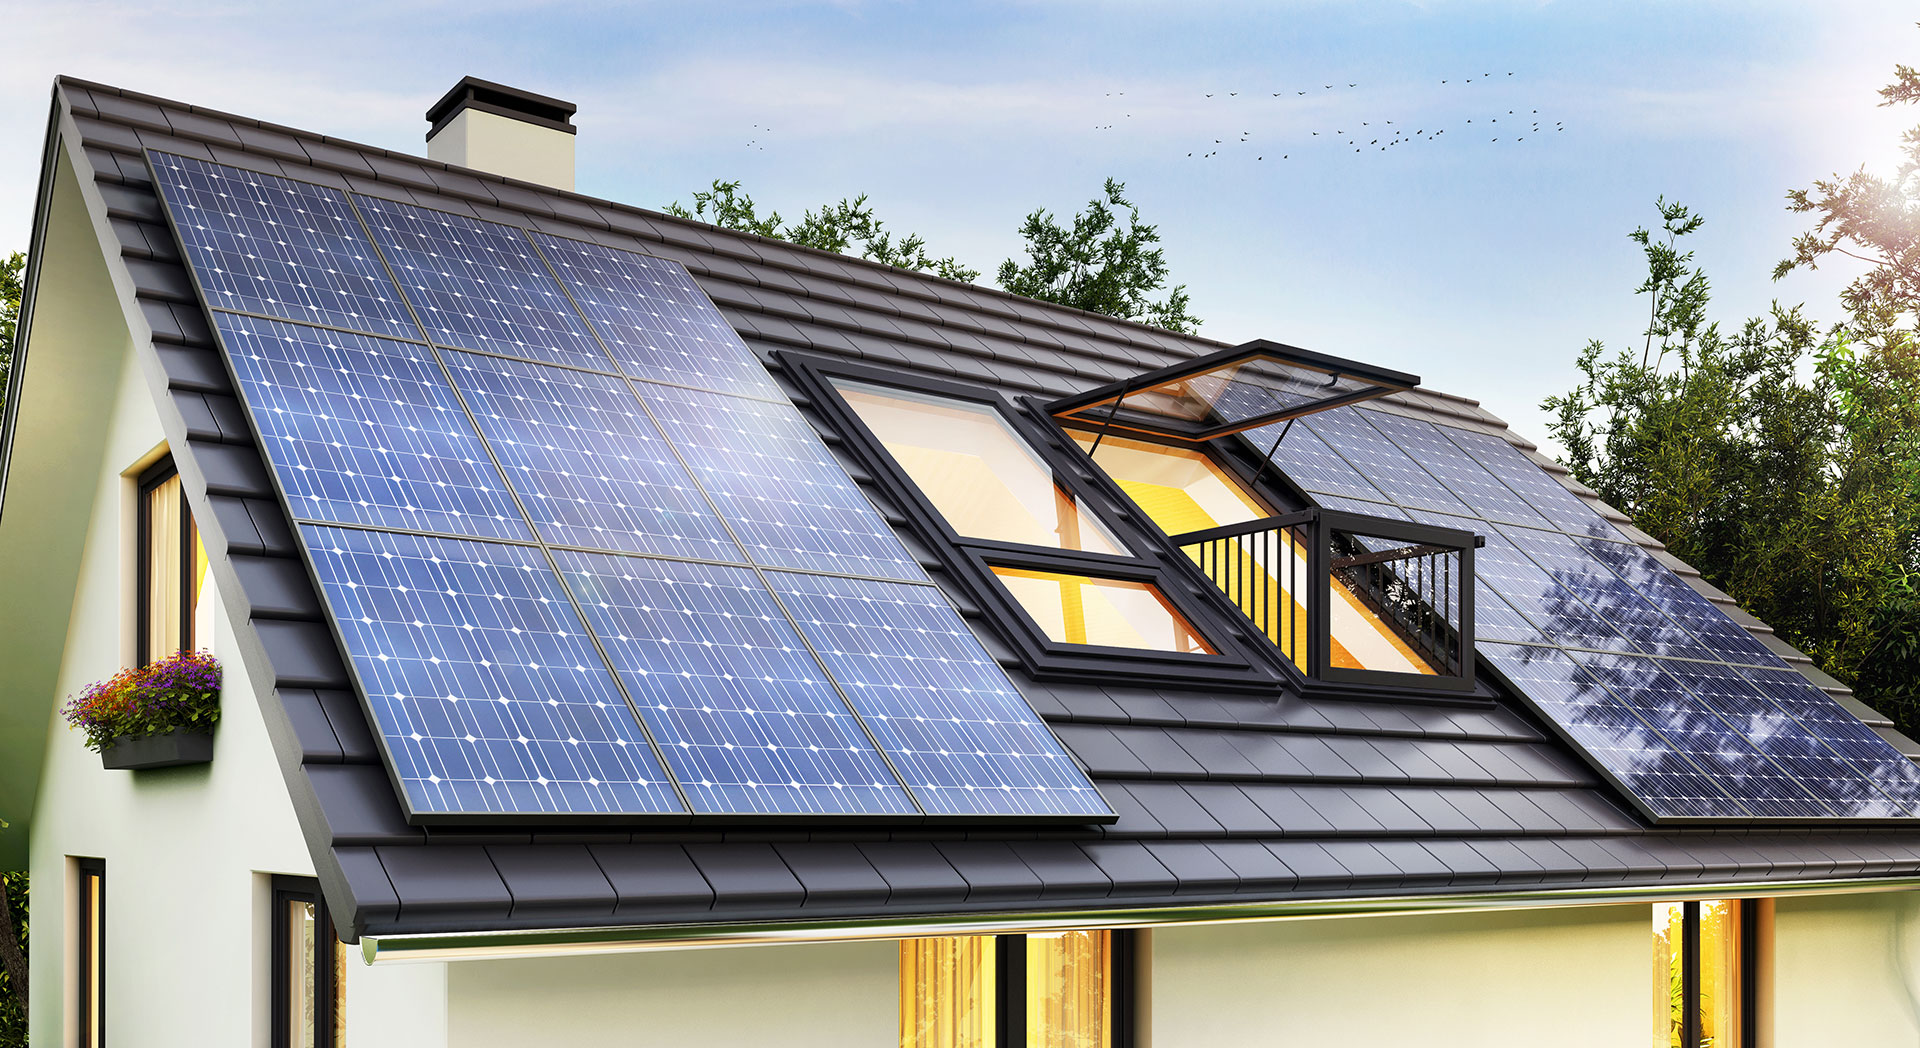 Vootu Solar panels produce 20% more electricity than standard industry panels